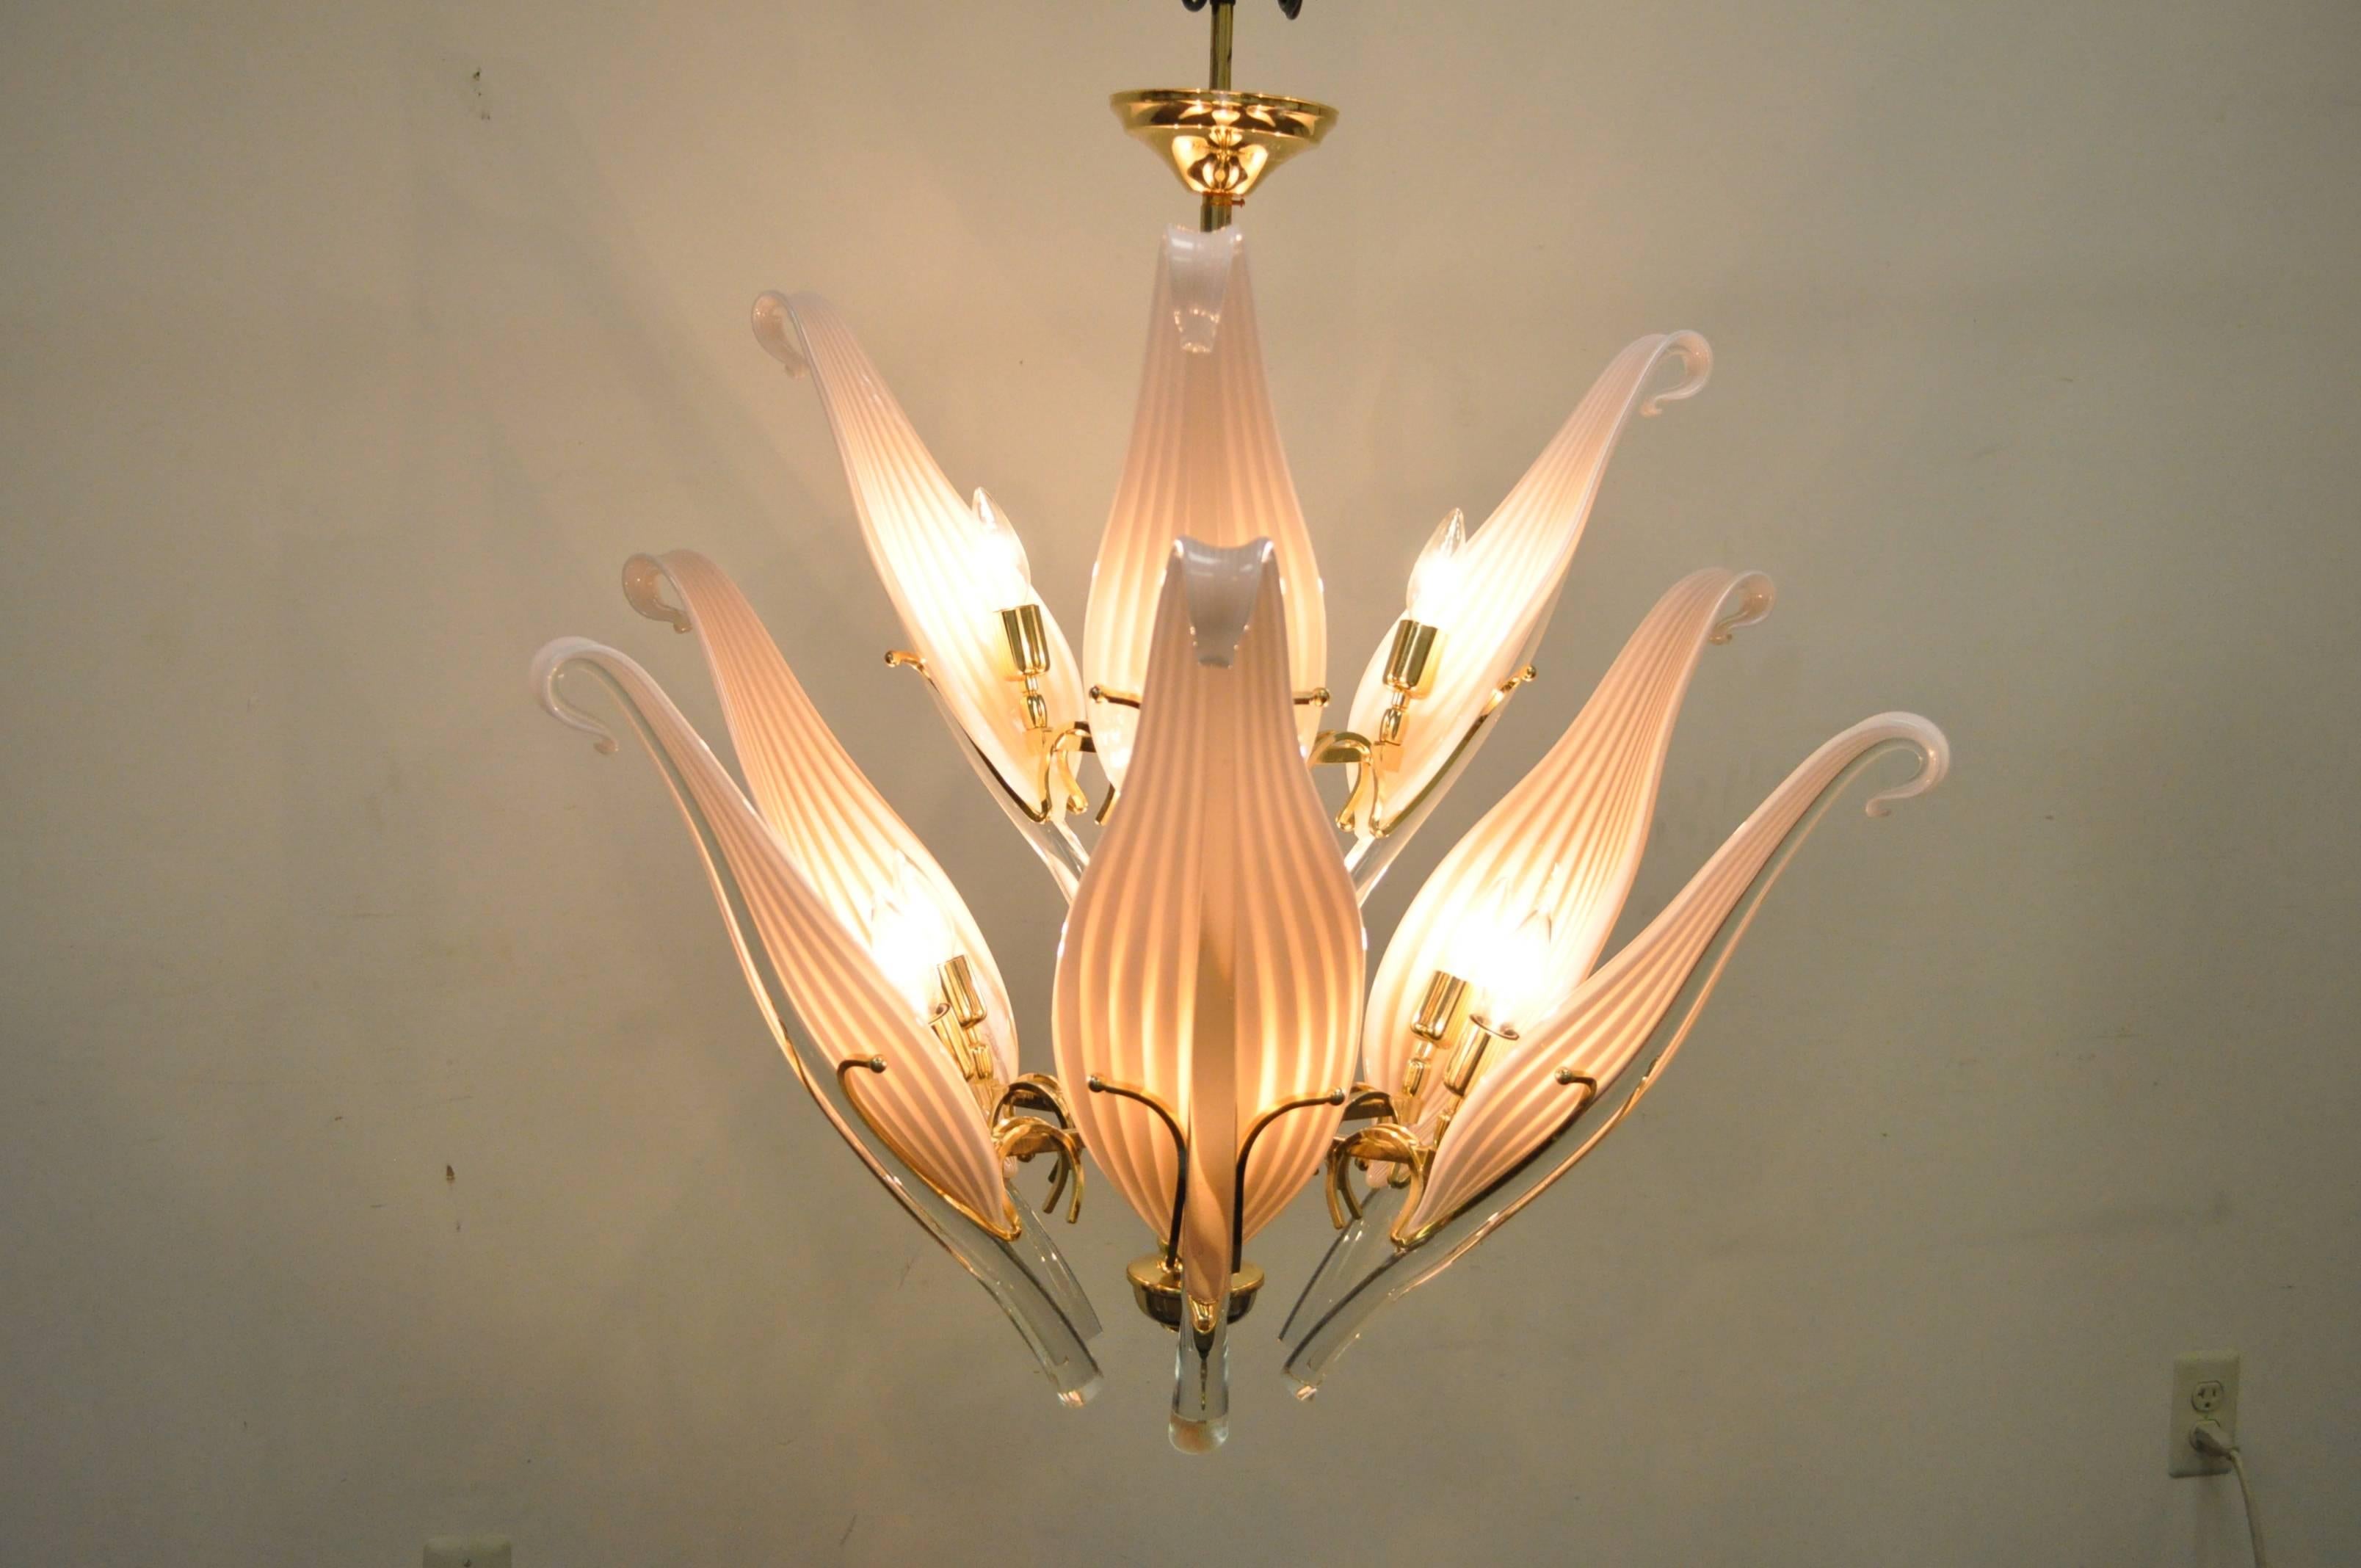 Beautiful Mid-Century Modern/Hollywood Regency Handblown glass two-tier chandelier by Seguso for Murano in a pinkish peach color. Fixture features nine cattail glass leaves which set in a brass frame. Leaves are Approx 20